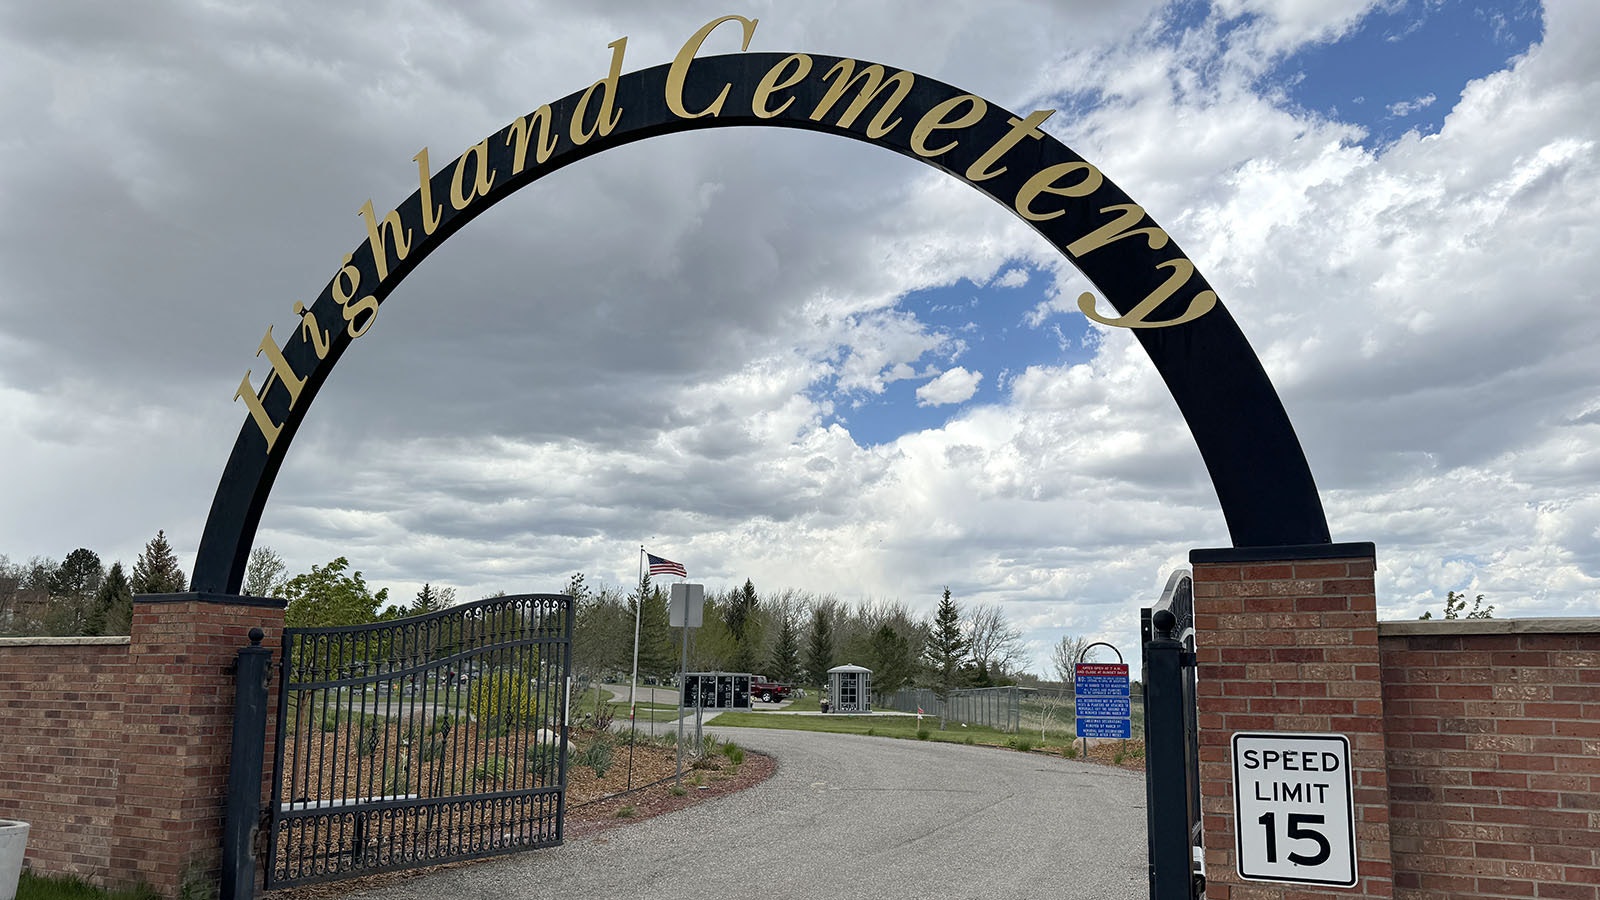 The entrance to Highland Cemetery in Casper where a columbarium is to built for cremated remains of people that next-of-kin don’t want.